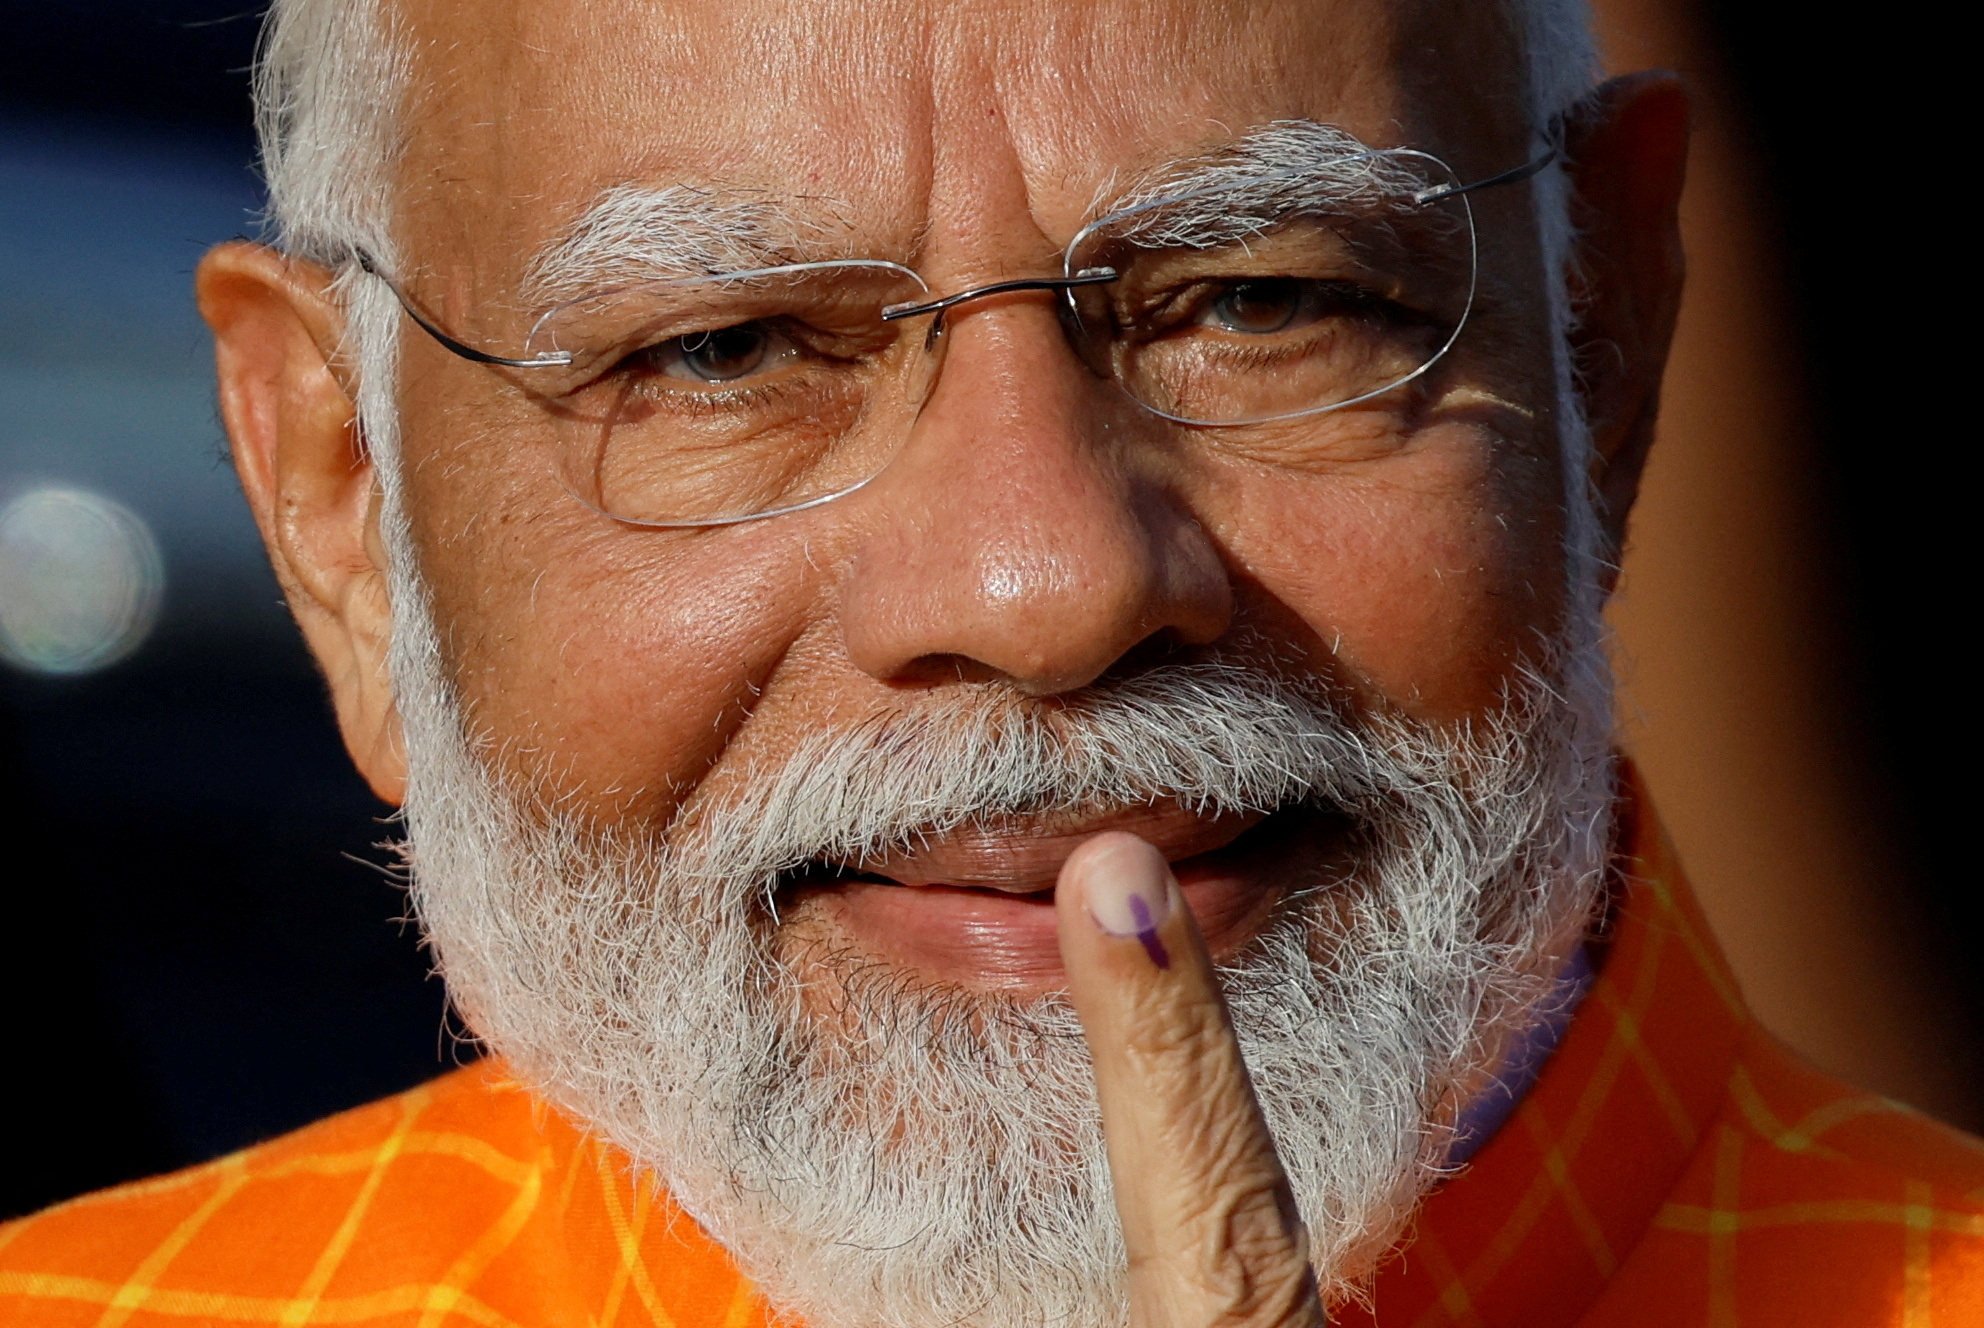 India’s Prime Minister Narendra Modi shows his ink-marked finger after voting at a polling station in Ahmedabad, India on Tuesday. Photo: Reuters